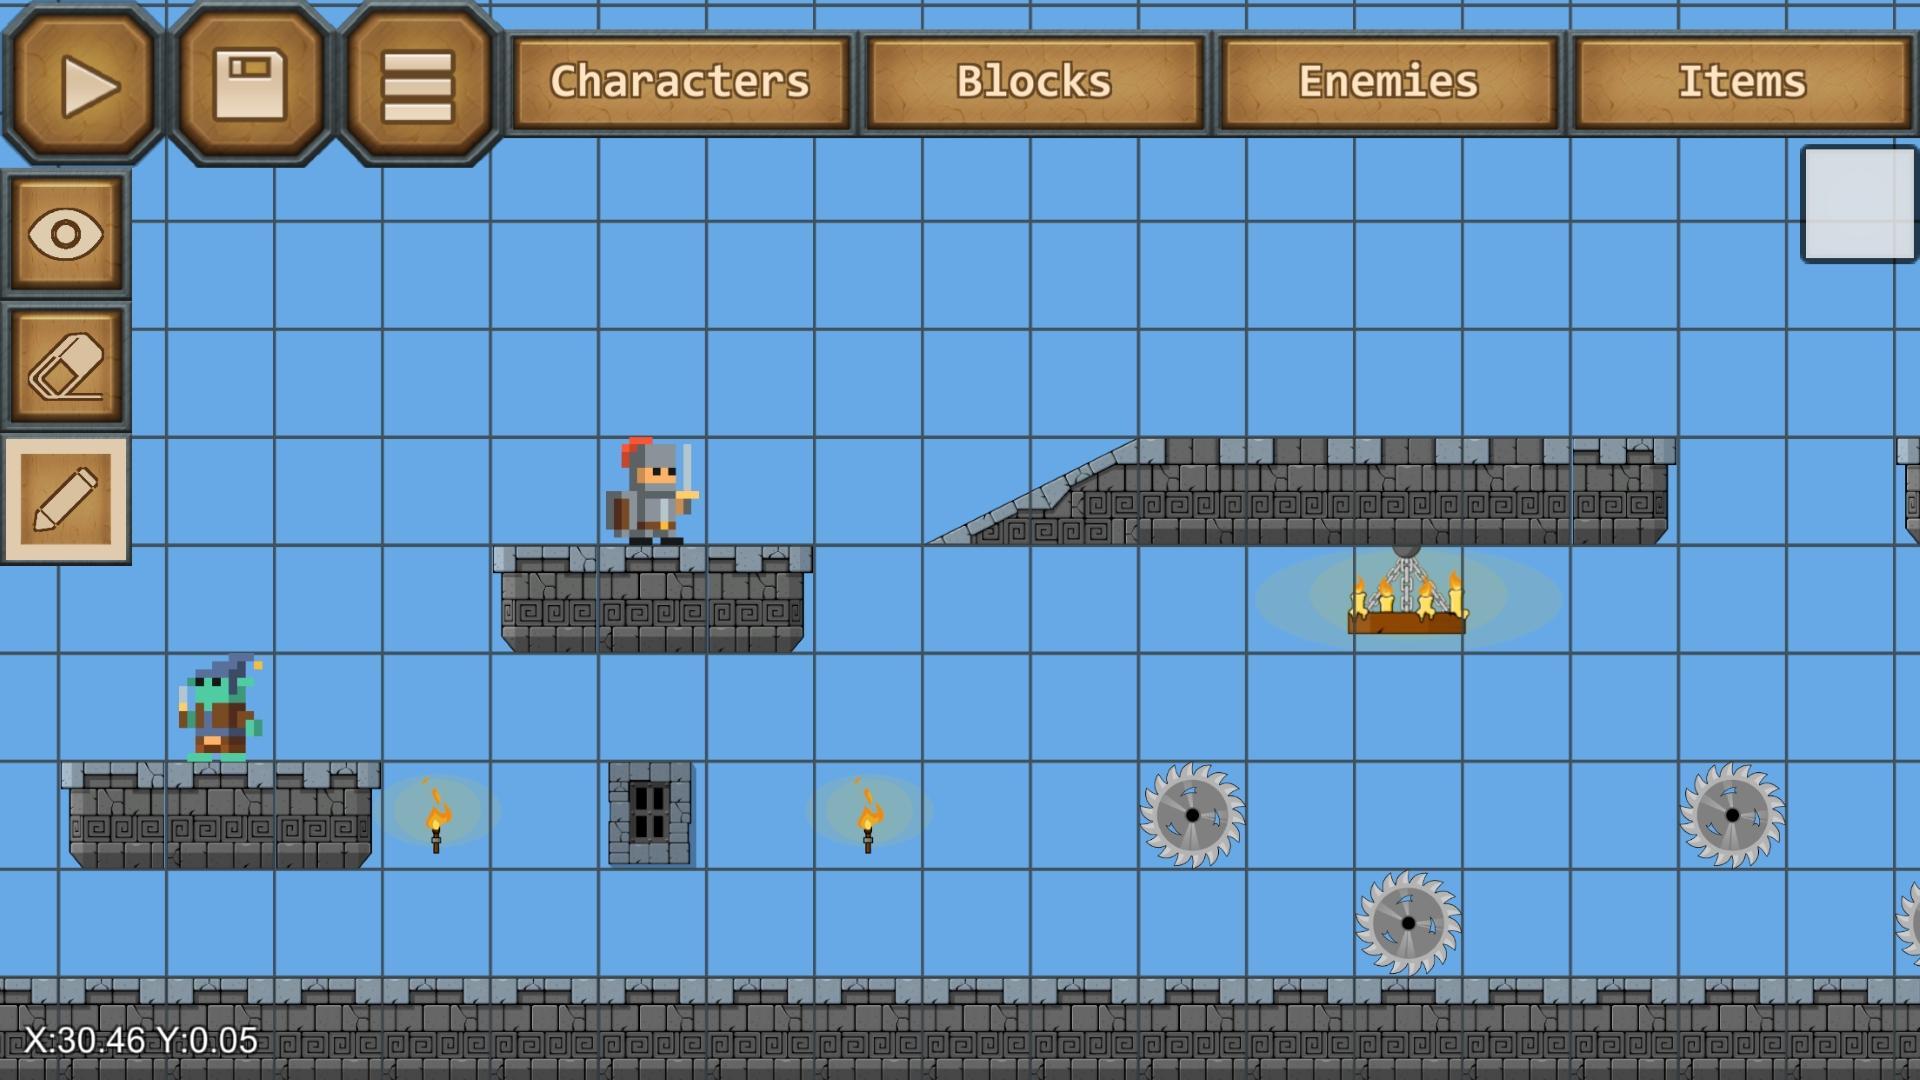 Epic Game Maker Create and Share Your Levels 1.9 Screenshot 20